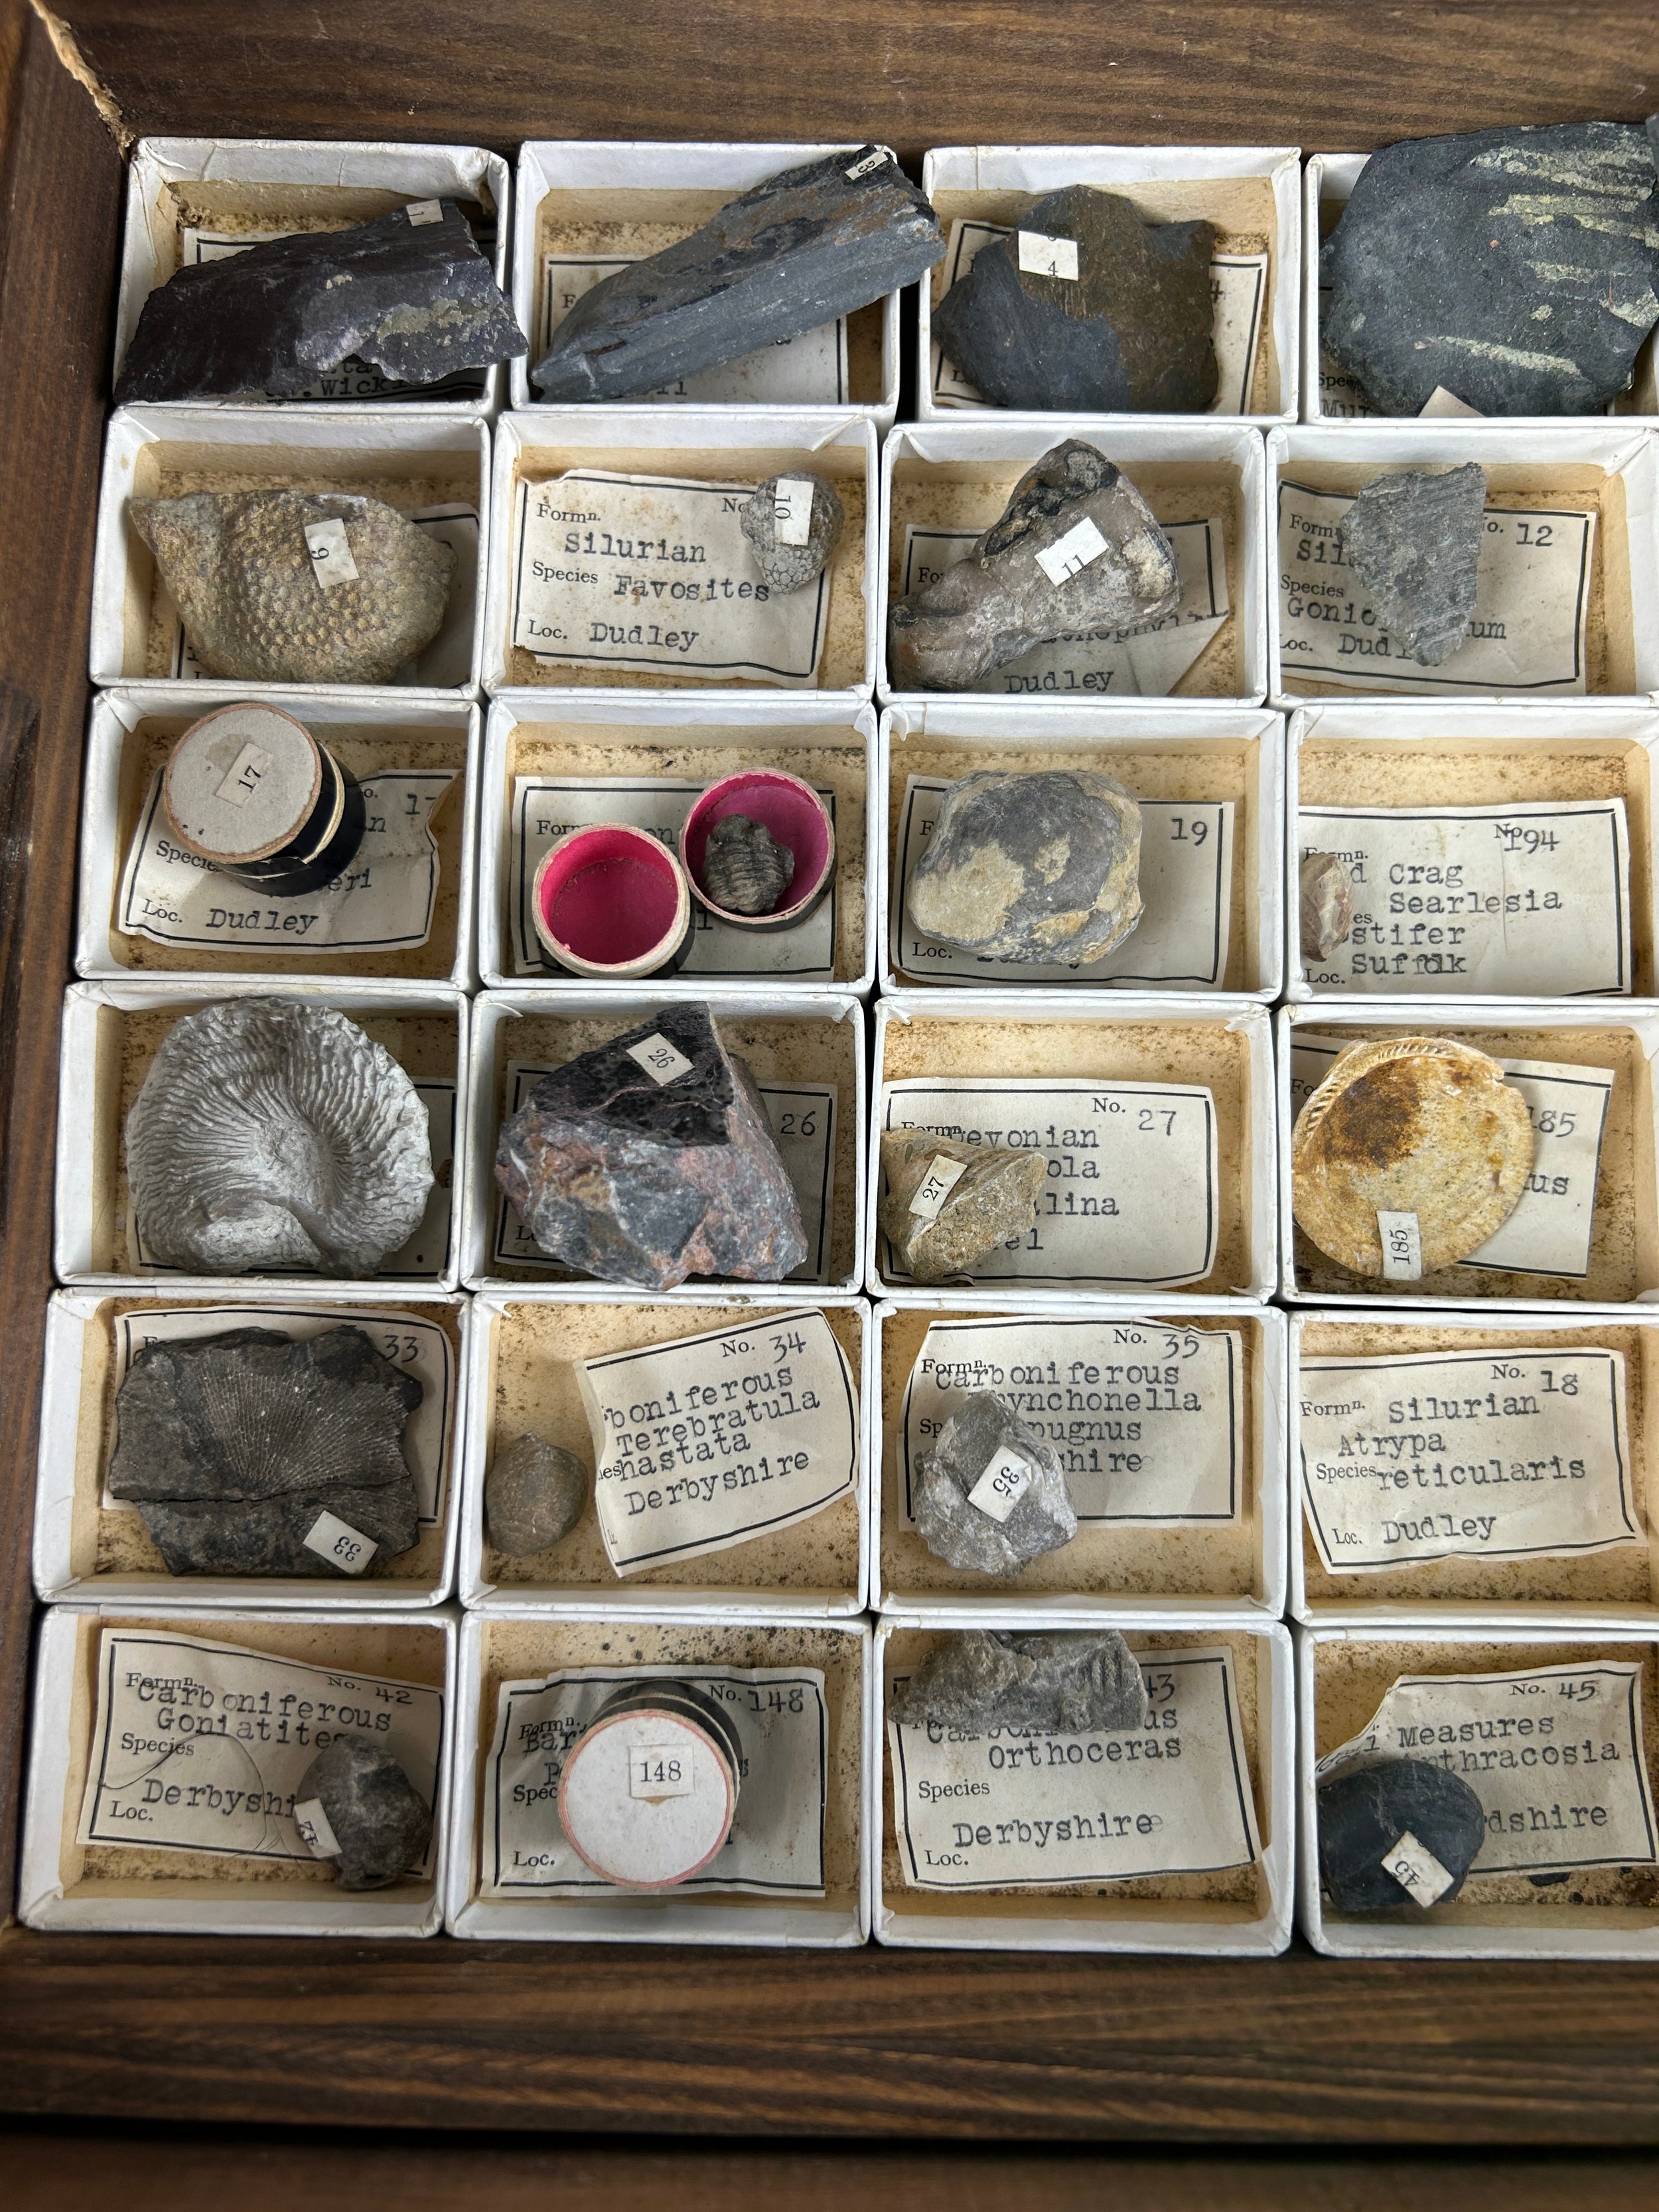 A GREGORY BOTTLEY CASED COLLECTION OF FOSSILS, Four wooden trays contained in a wooden box. - Image 7 of 12